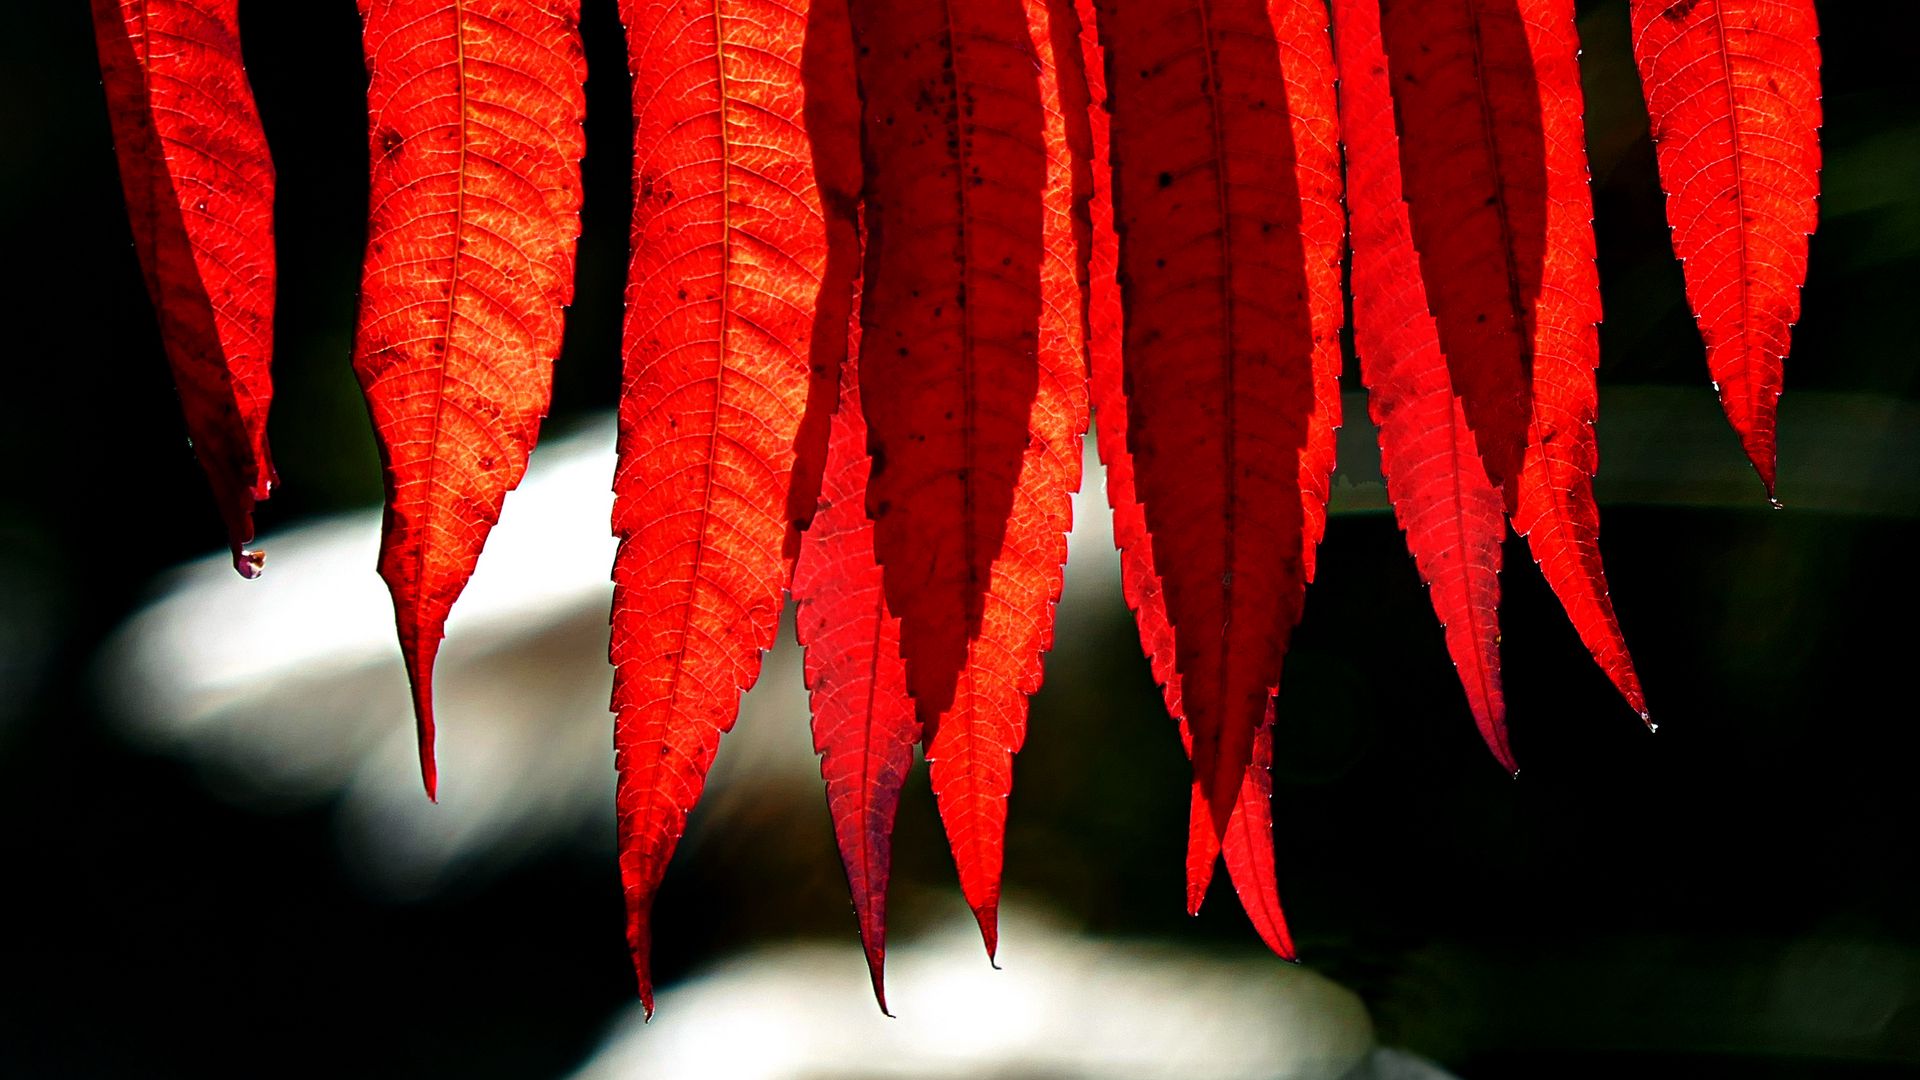 General 1920x1080 nature leaves fall sunlight photography red leaves depth of field